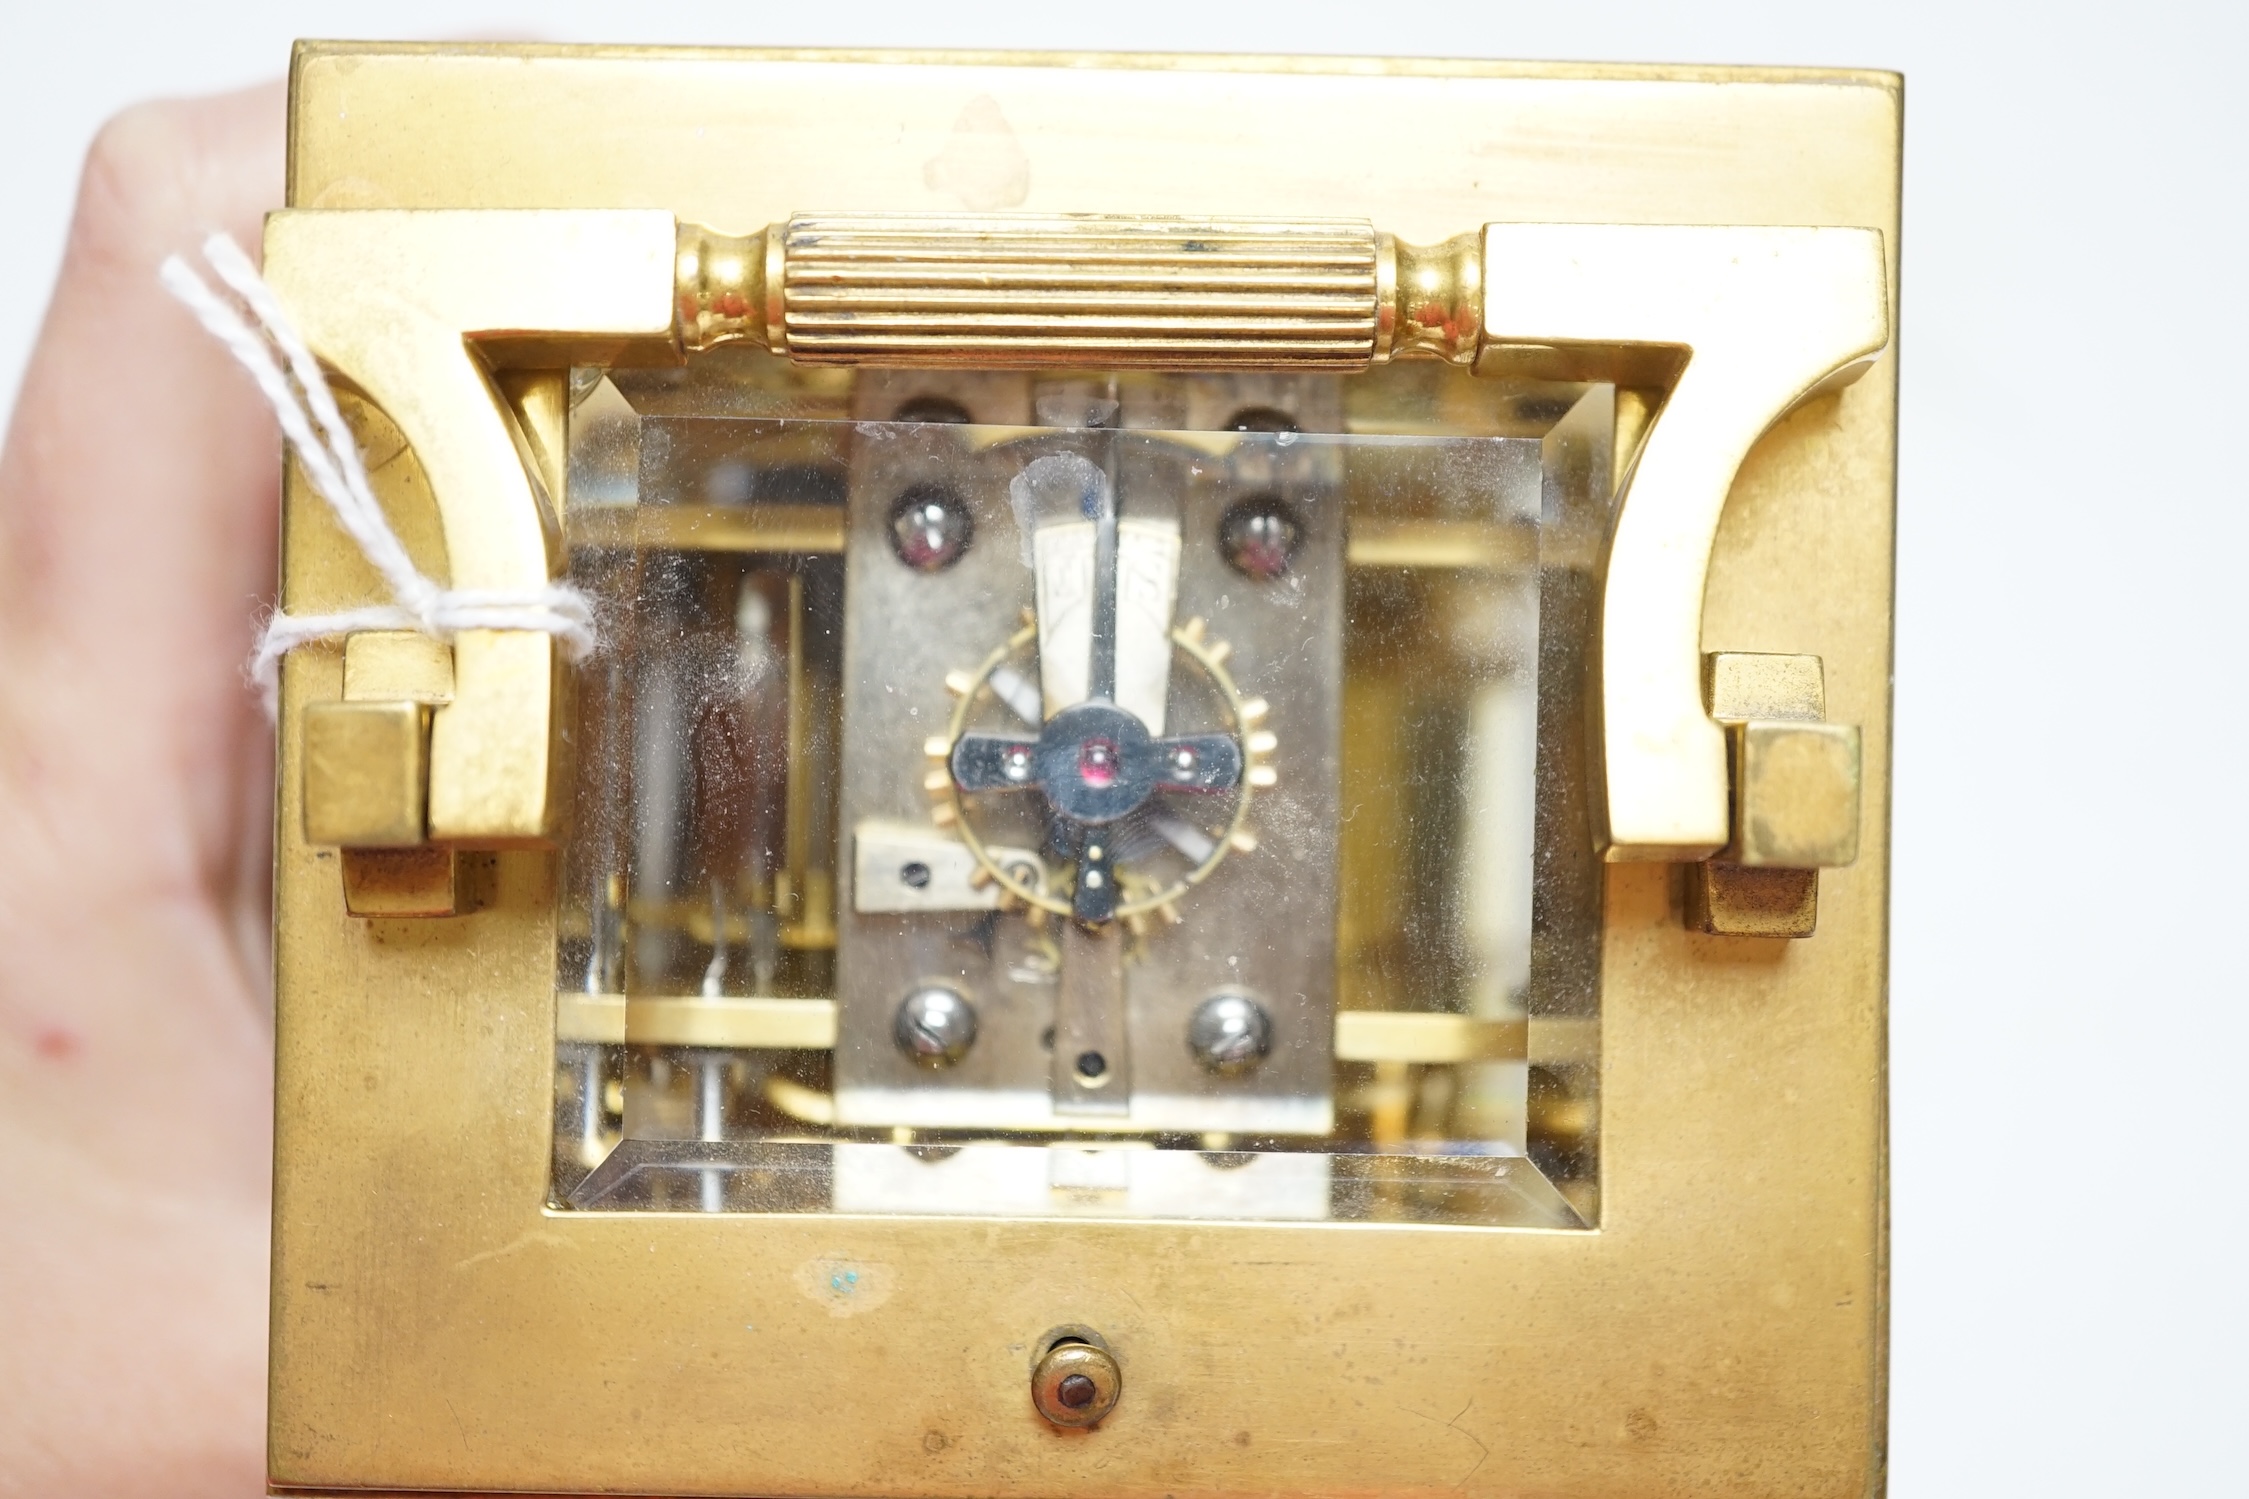 A late 19th century French repeating carriage clock, with Richard movement, in travelling case with key, 15cm high. Condition - good not tested for time keeping